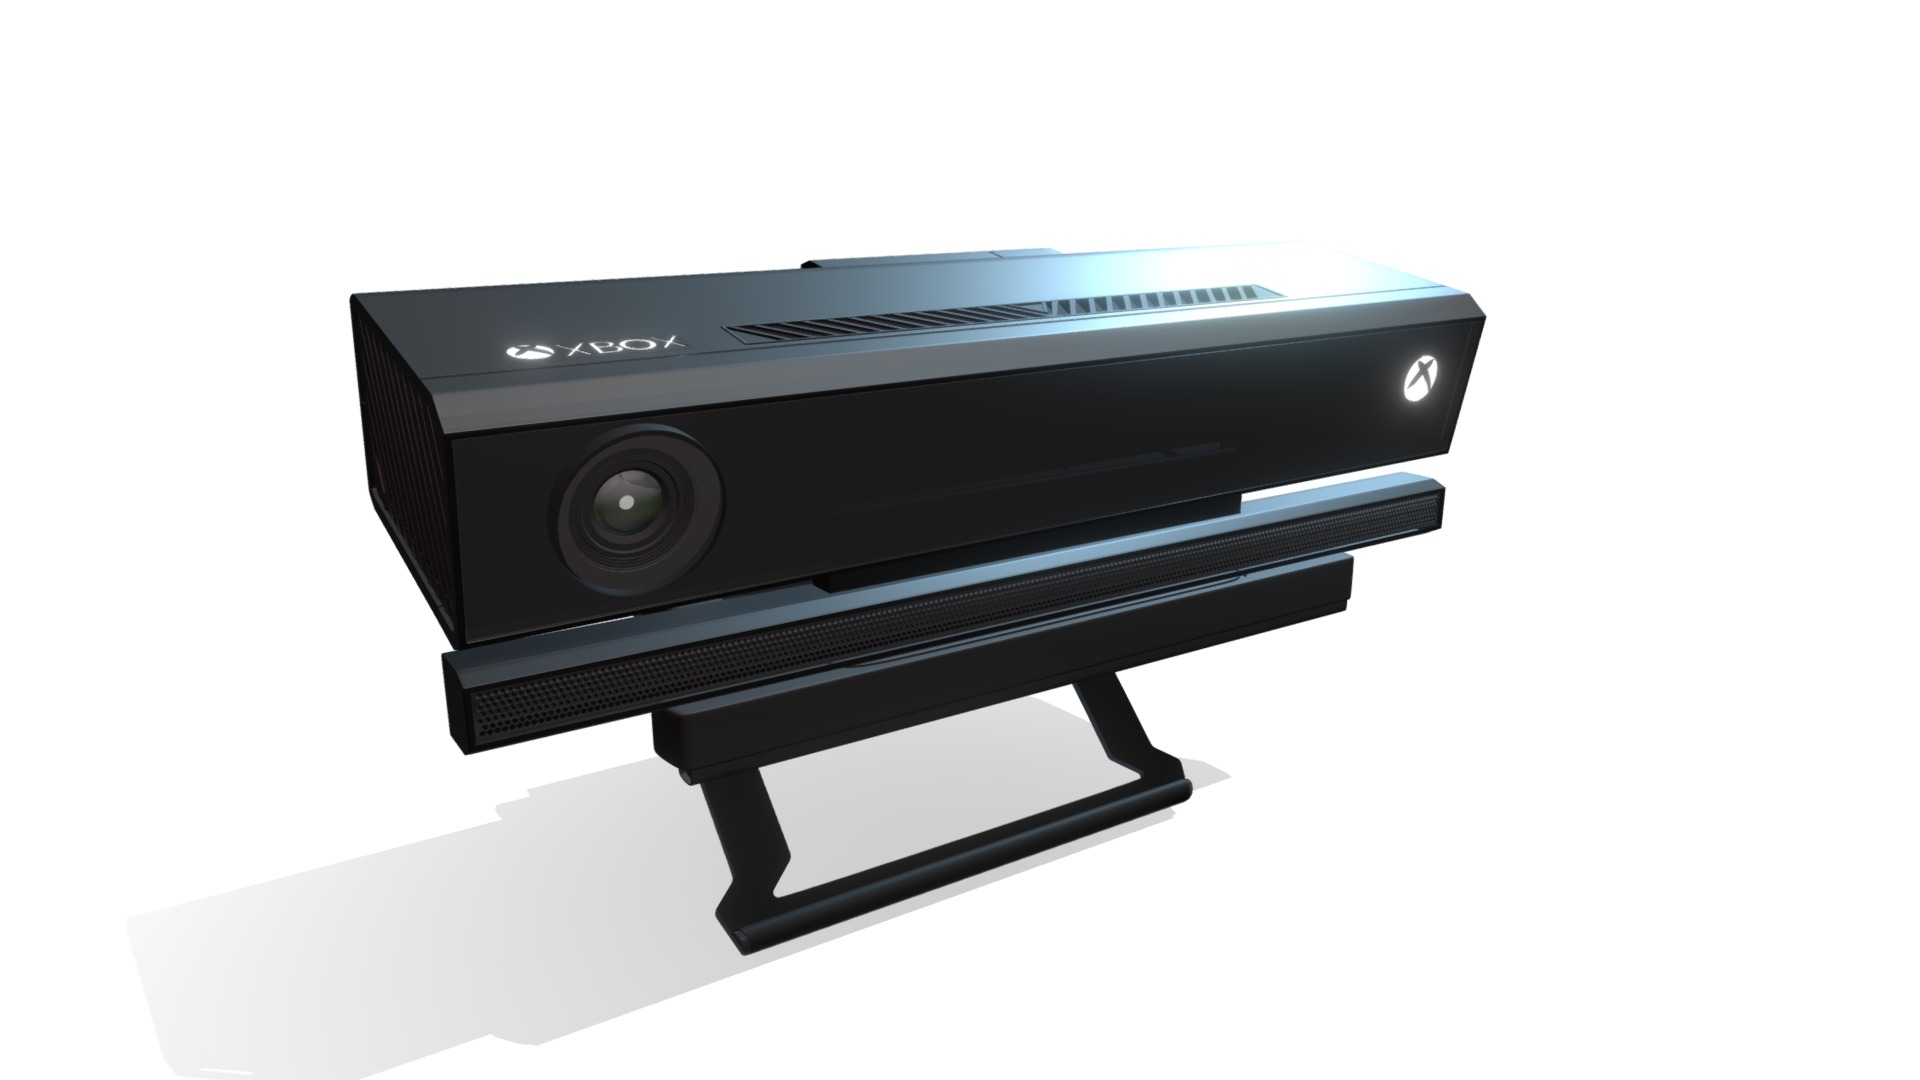 3D model Kinect 2 - This is a 3D model of the Kinect 2. The 3D model is about a black rectangular object with a screen.